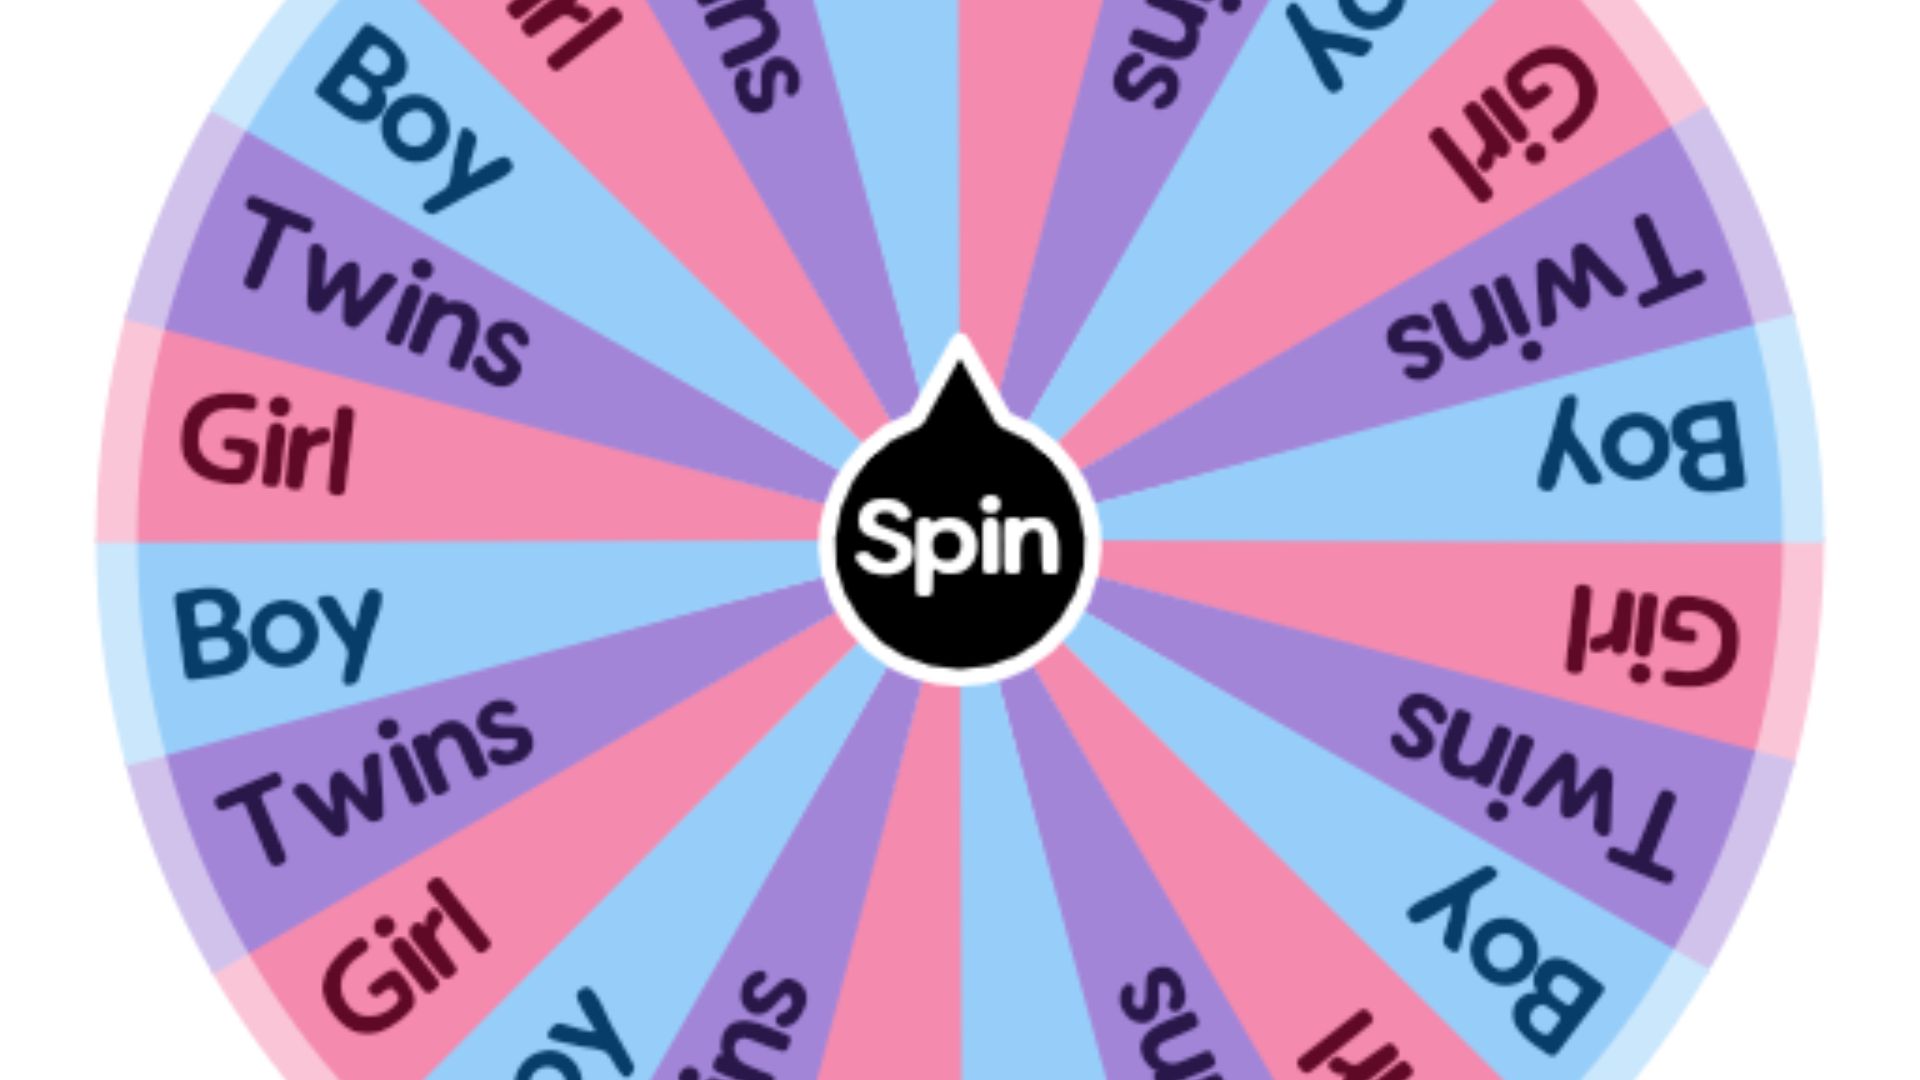 this image shows Spin Wheel Games for Virtual Baby Showers